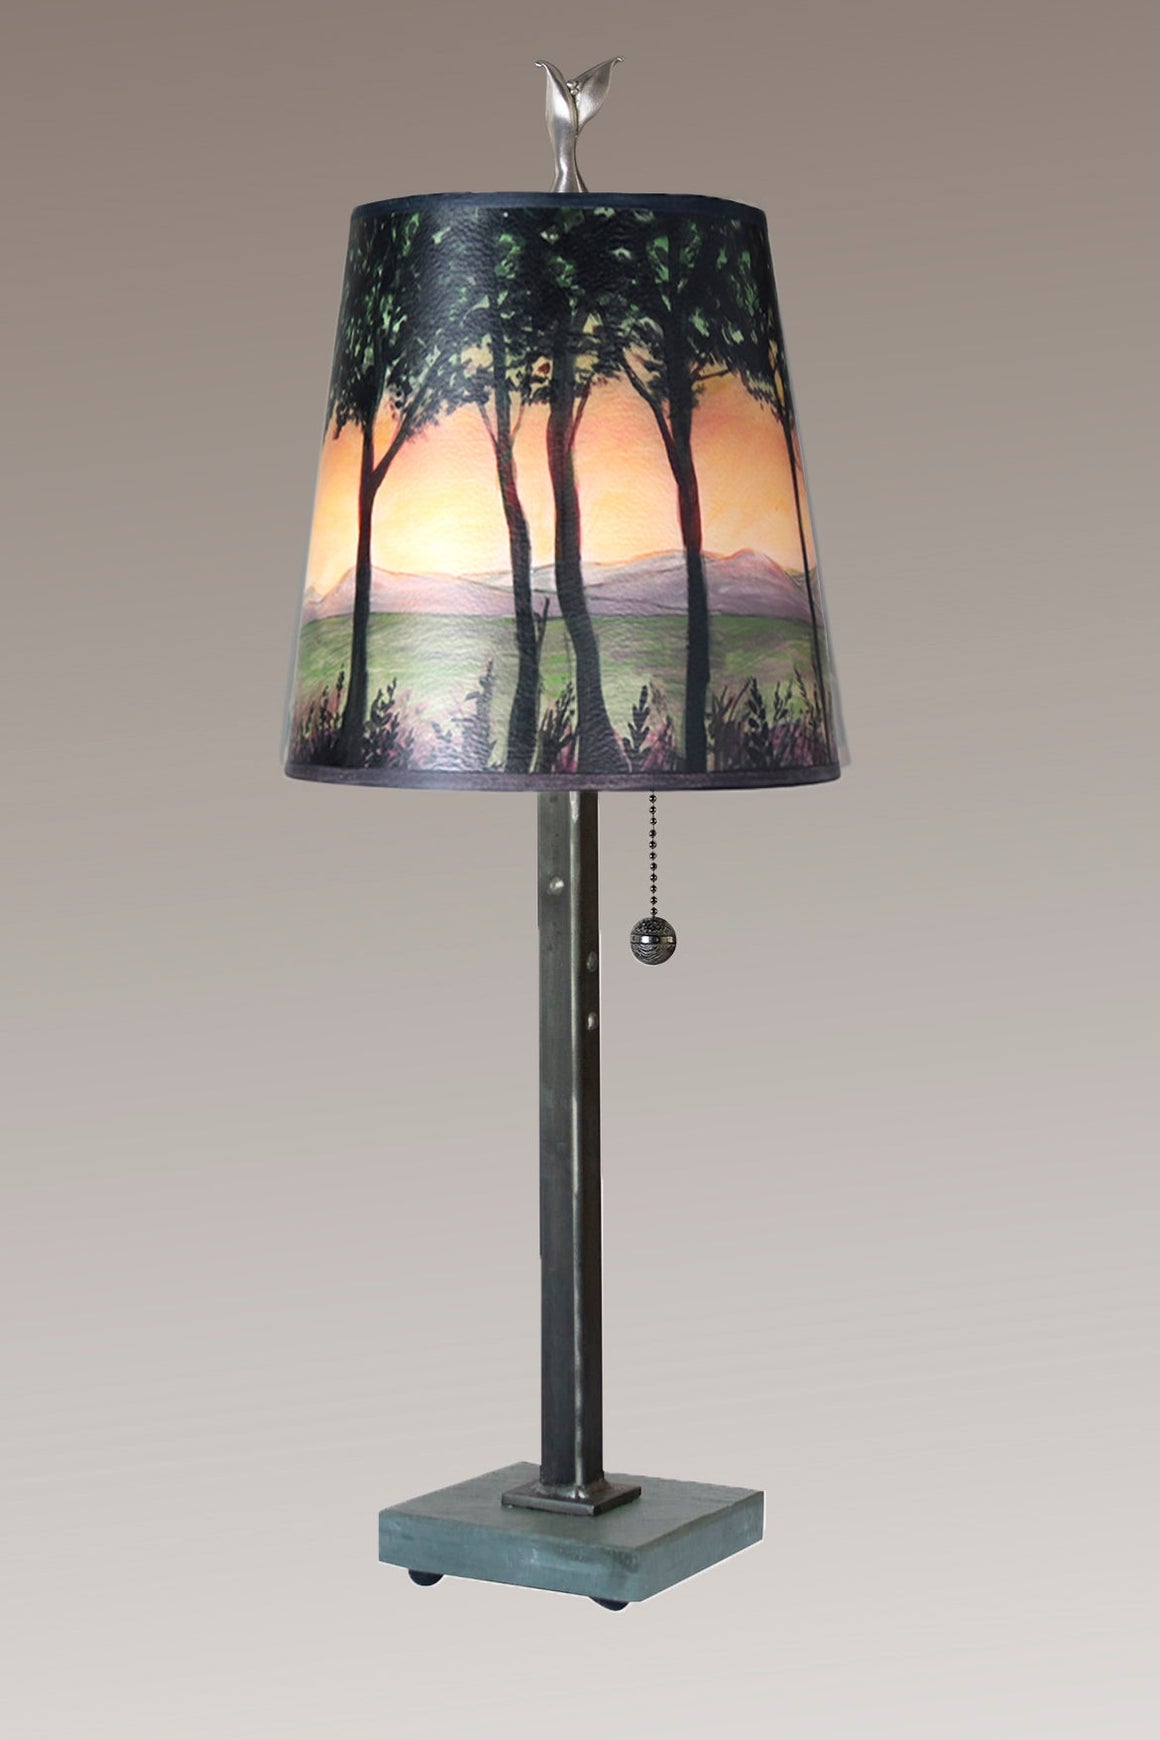 Steel Table Lamp with Small Drum Shade in Dawn